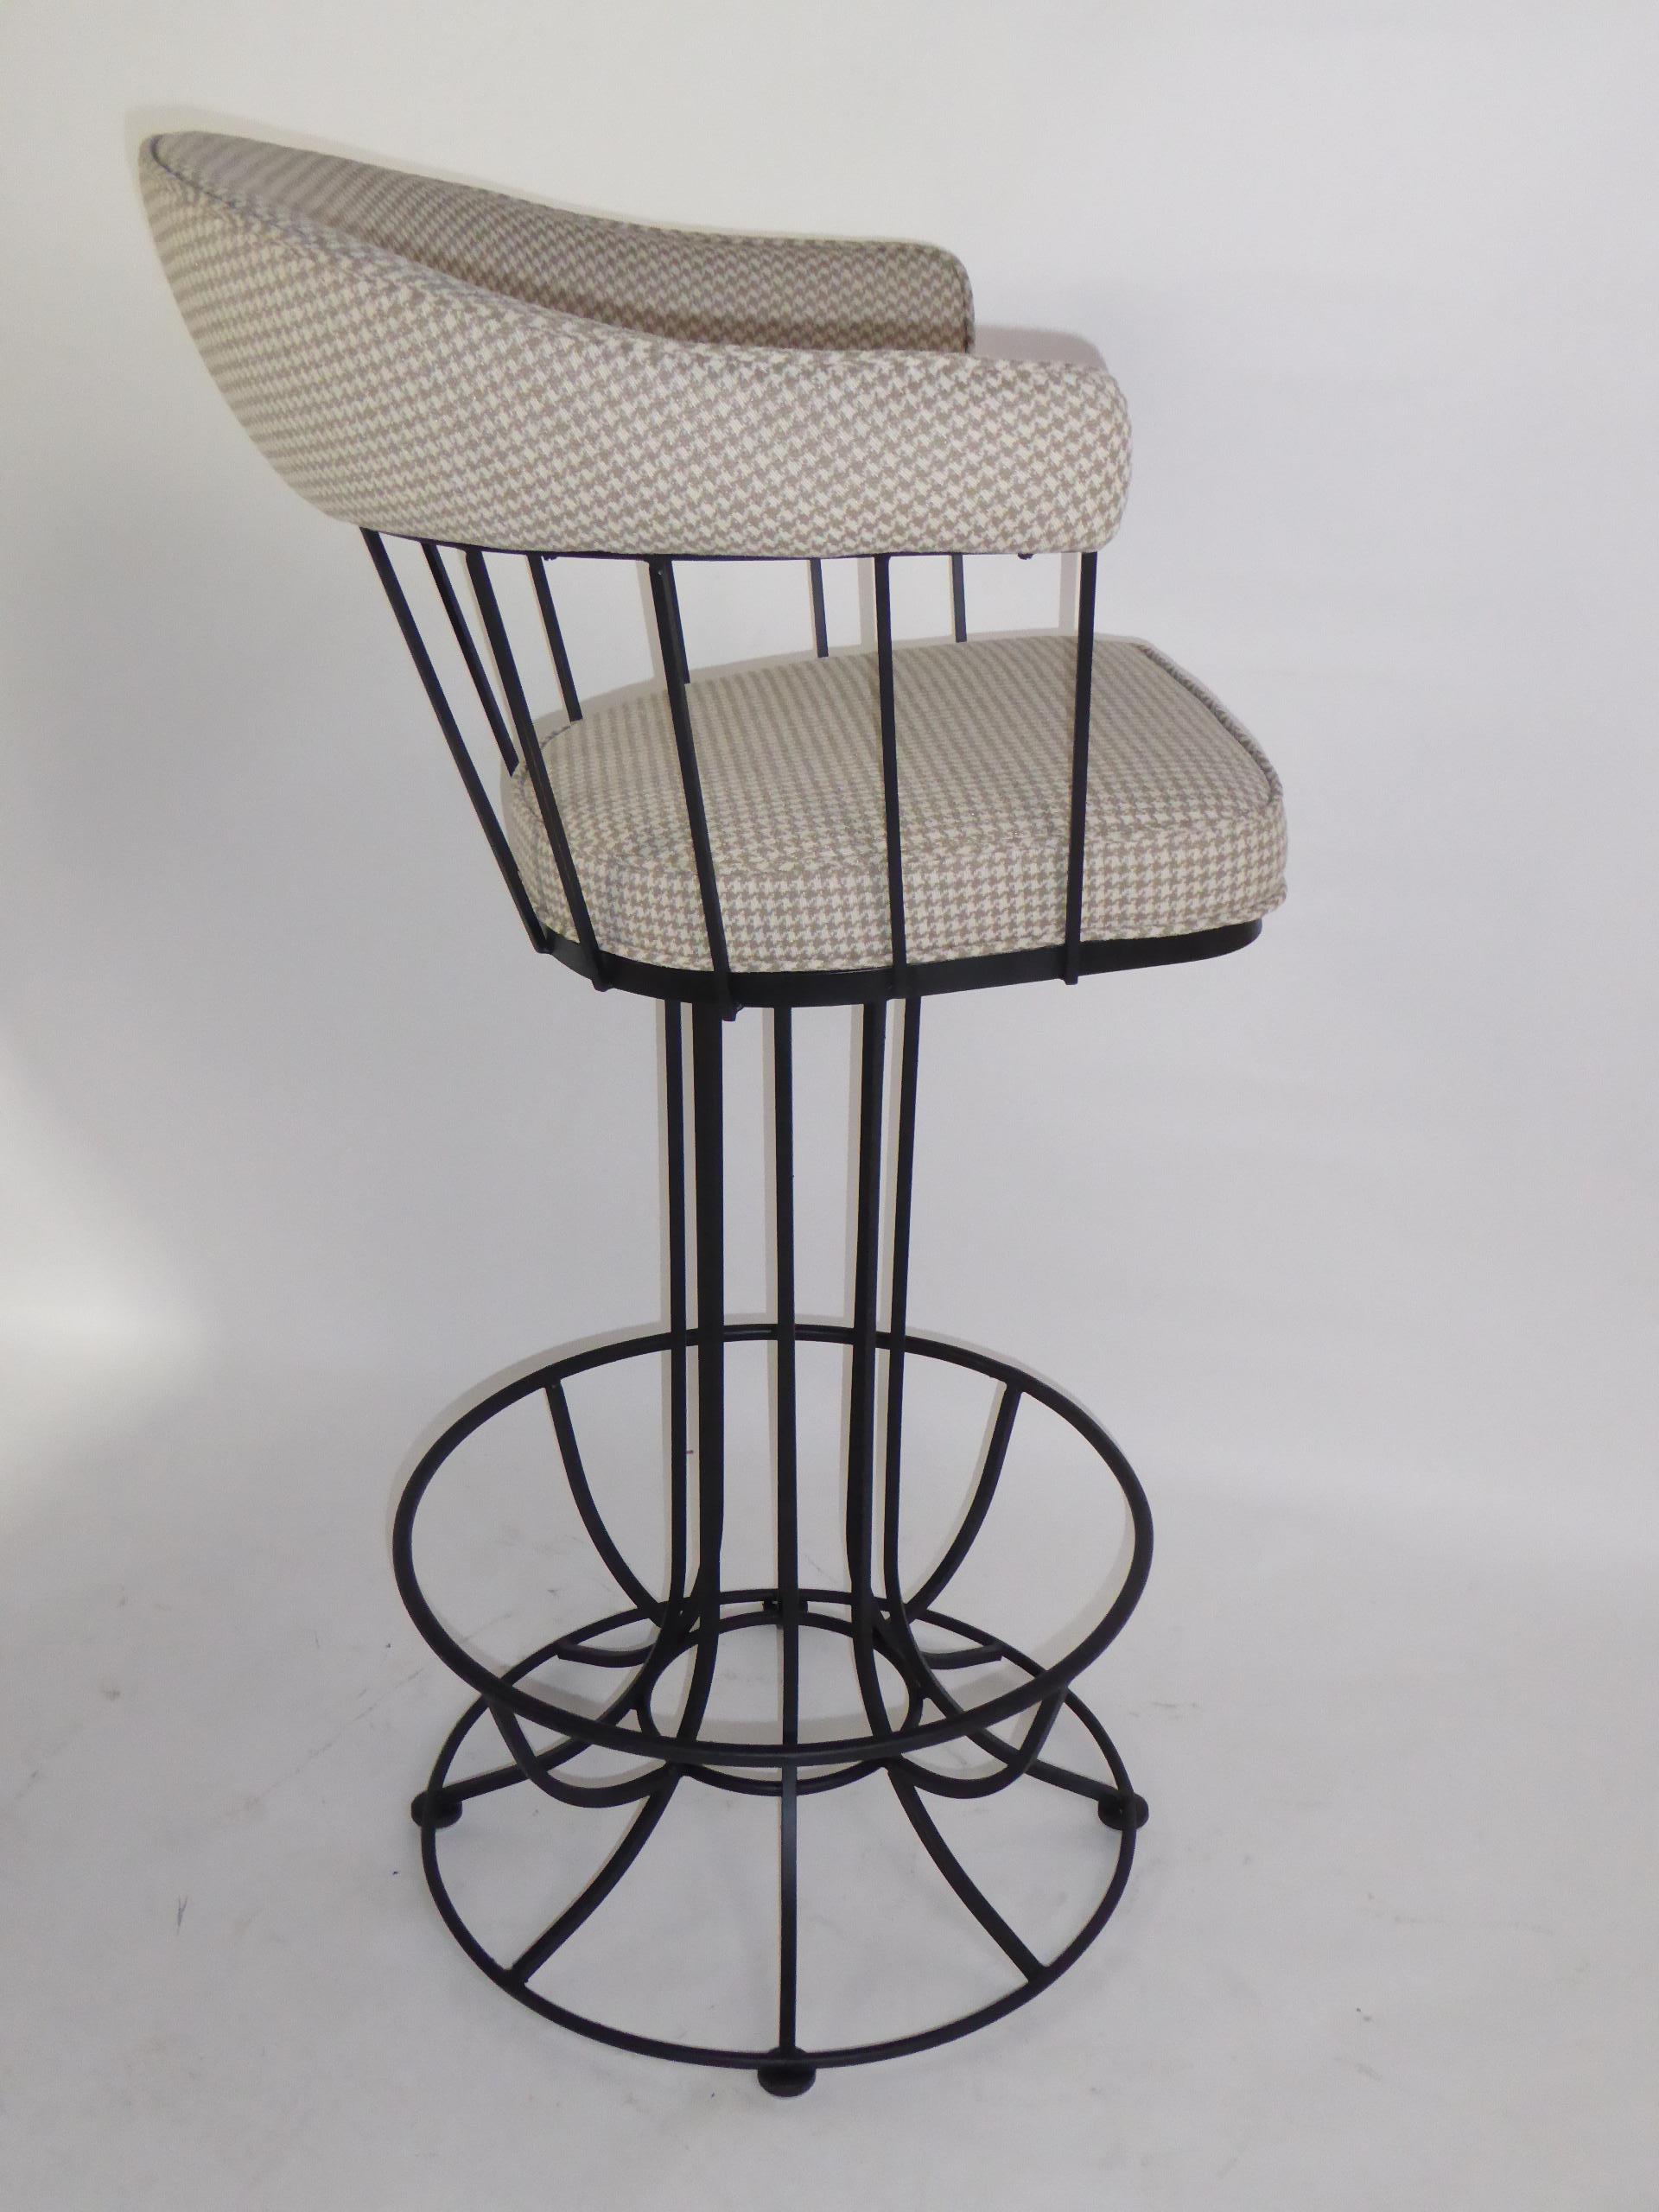 Iron Four 1960s Swiveling Bar Stools Upholstered in Houndstooth Anton Lorenz Inspired